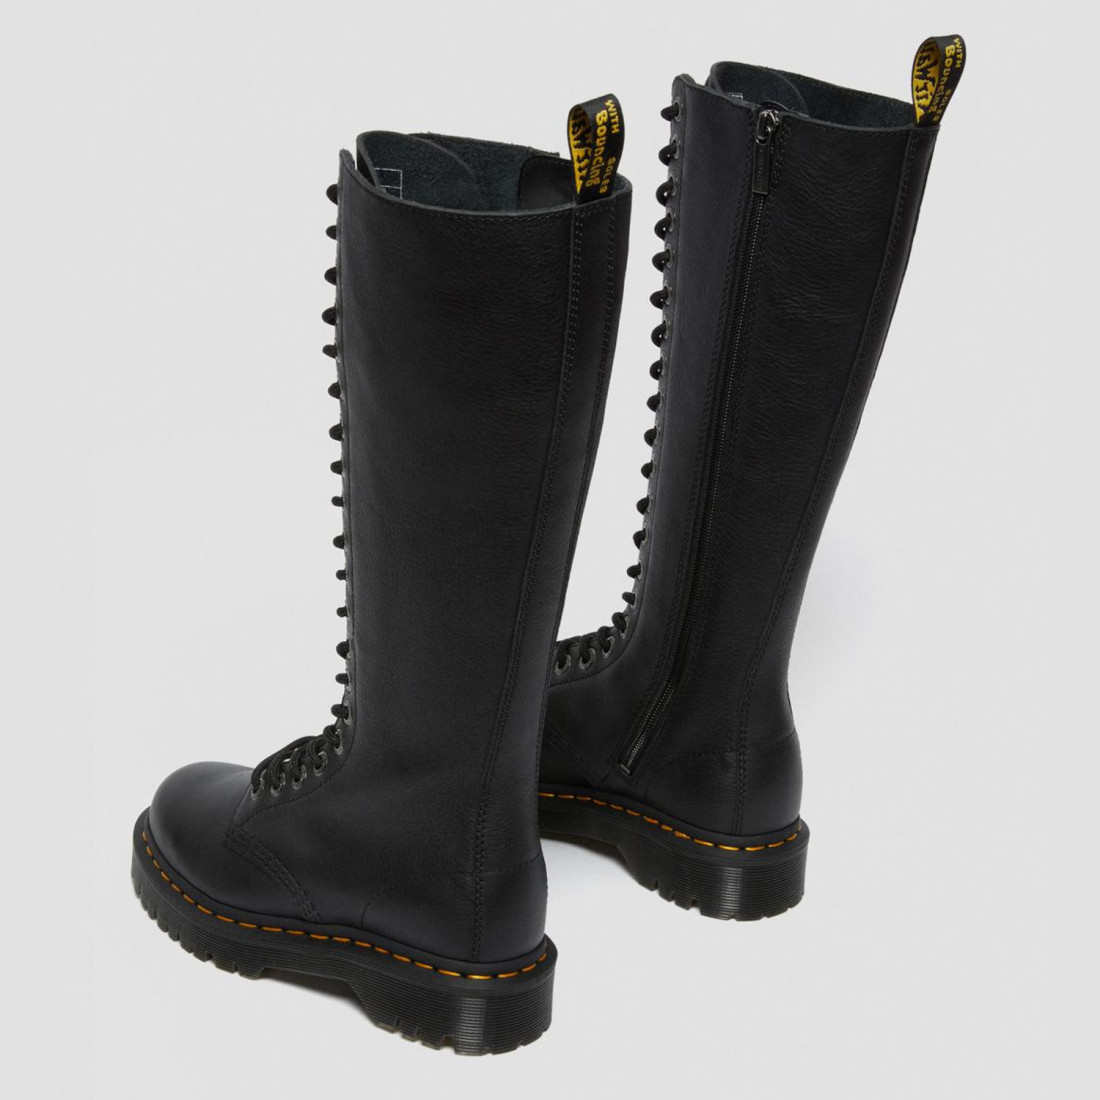 Dr. Martens 1B60 Bex black Pisa leather extra high boots